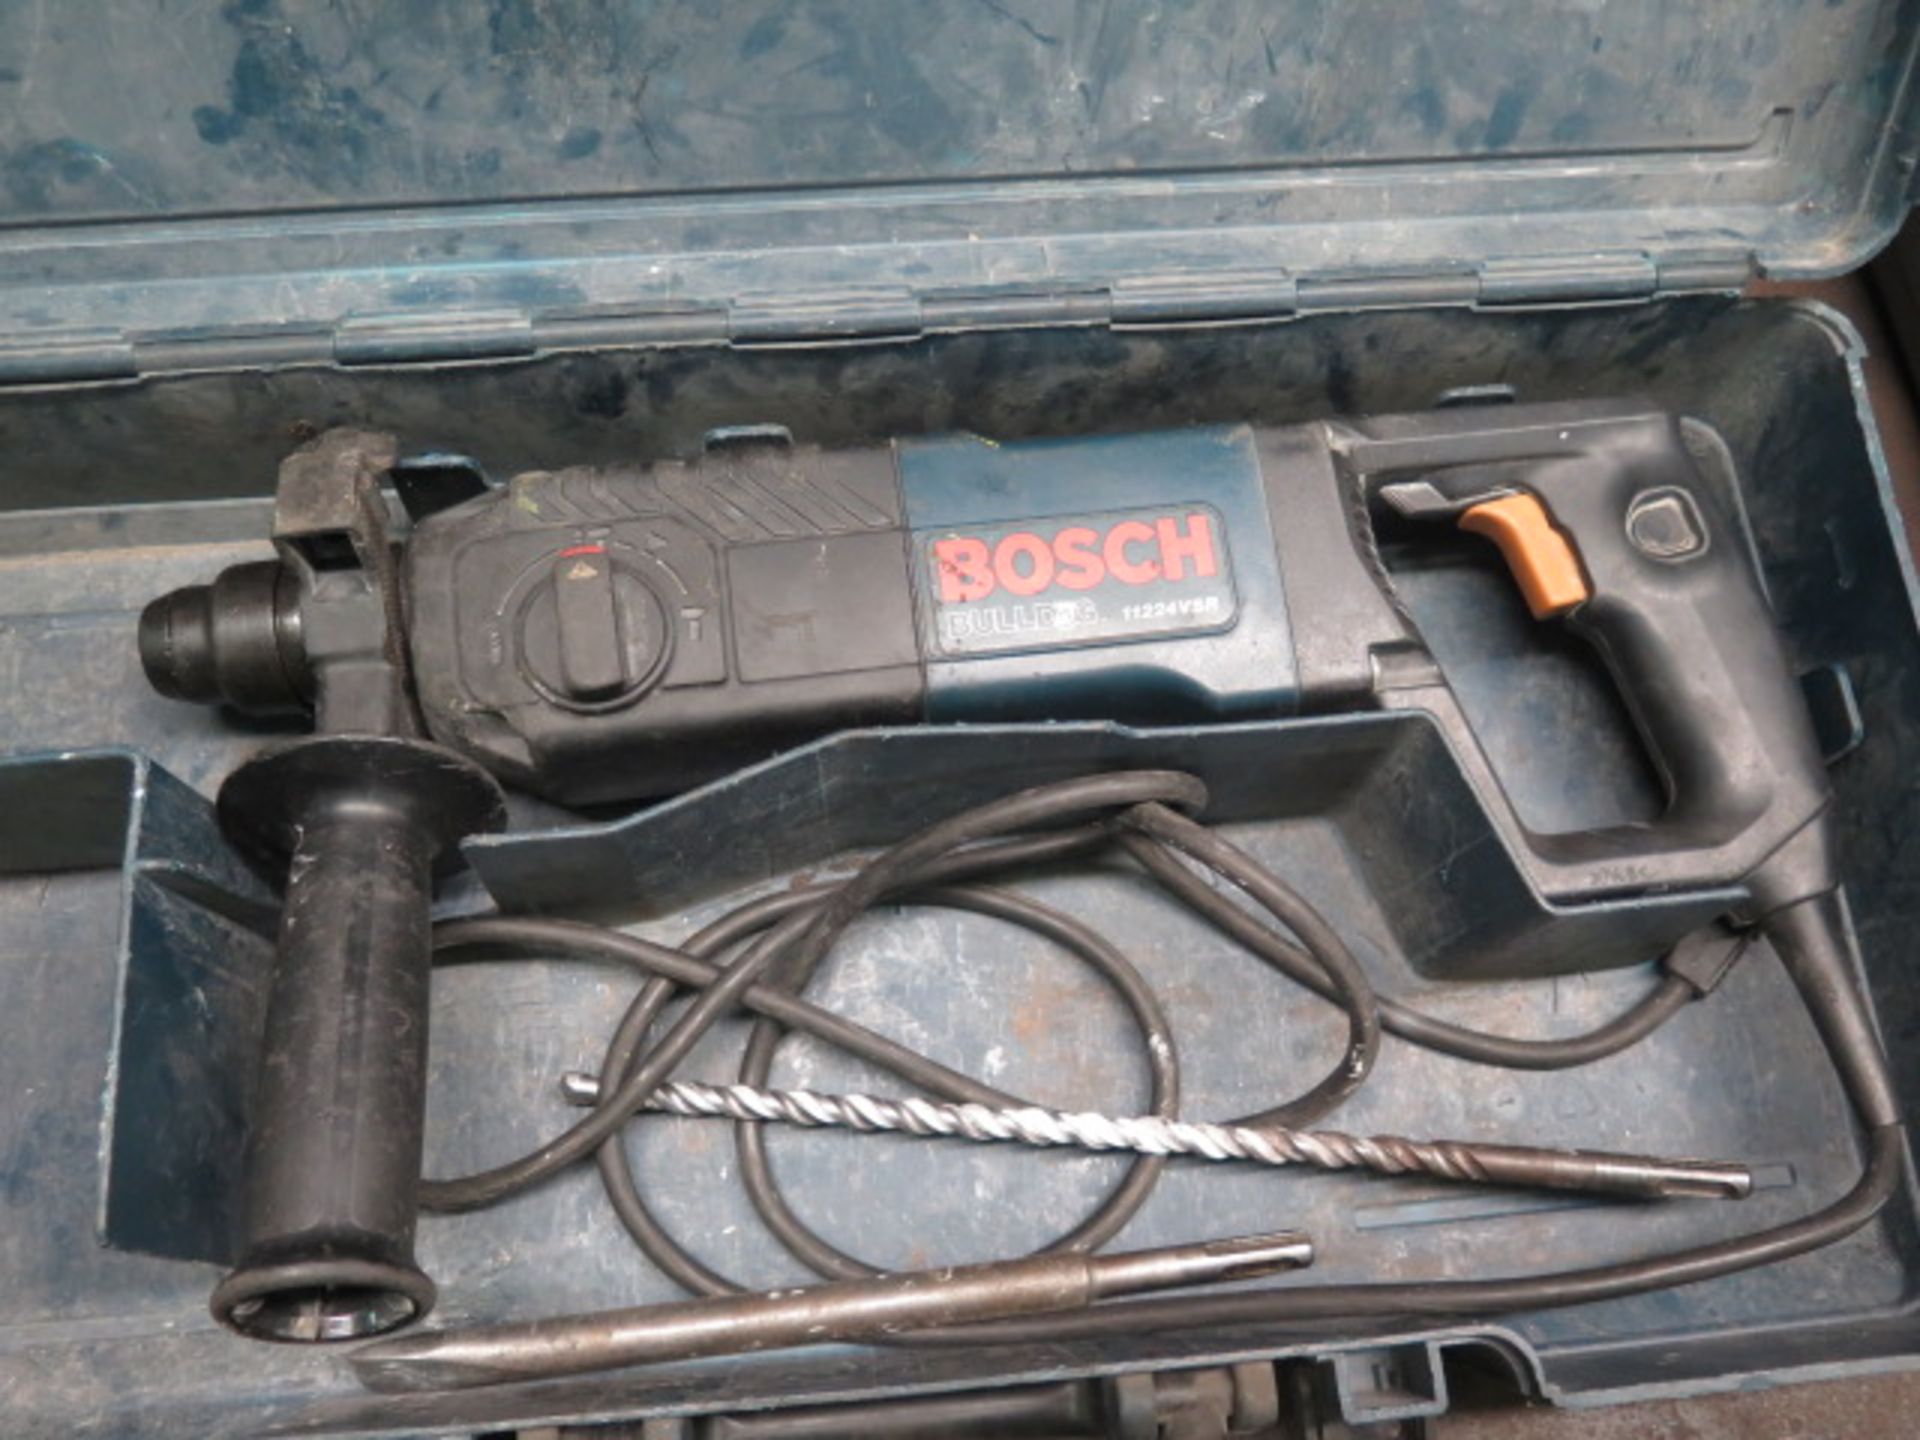 Bosch Hammer Drill (SOLD AS-IS - NO WARRANTY) - Image 2 of 2